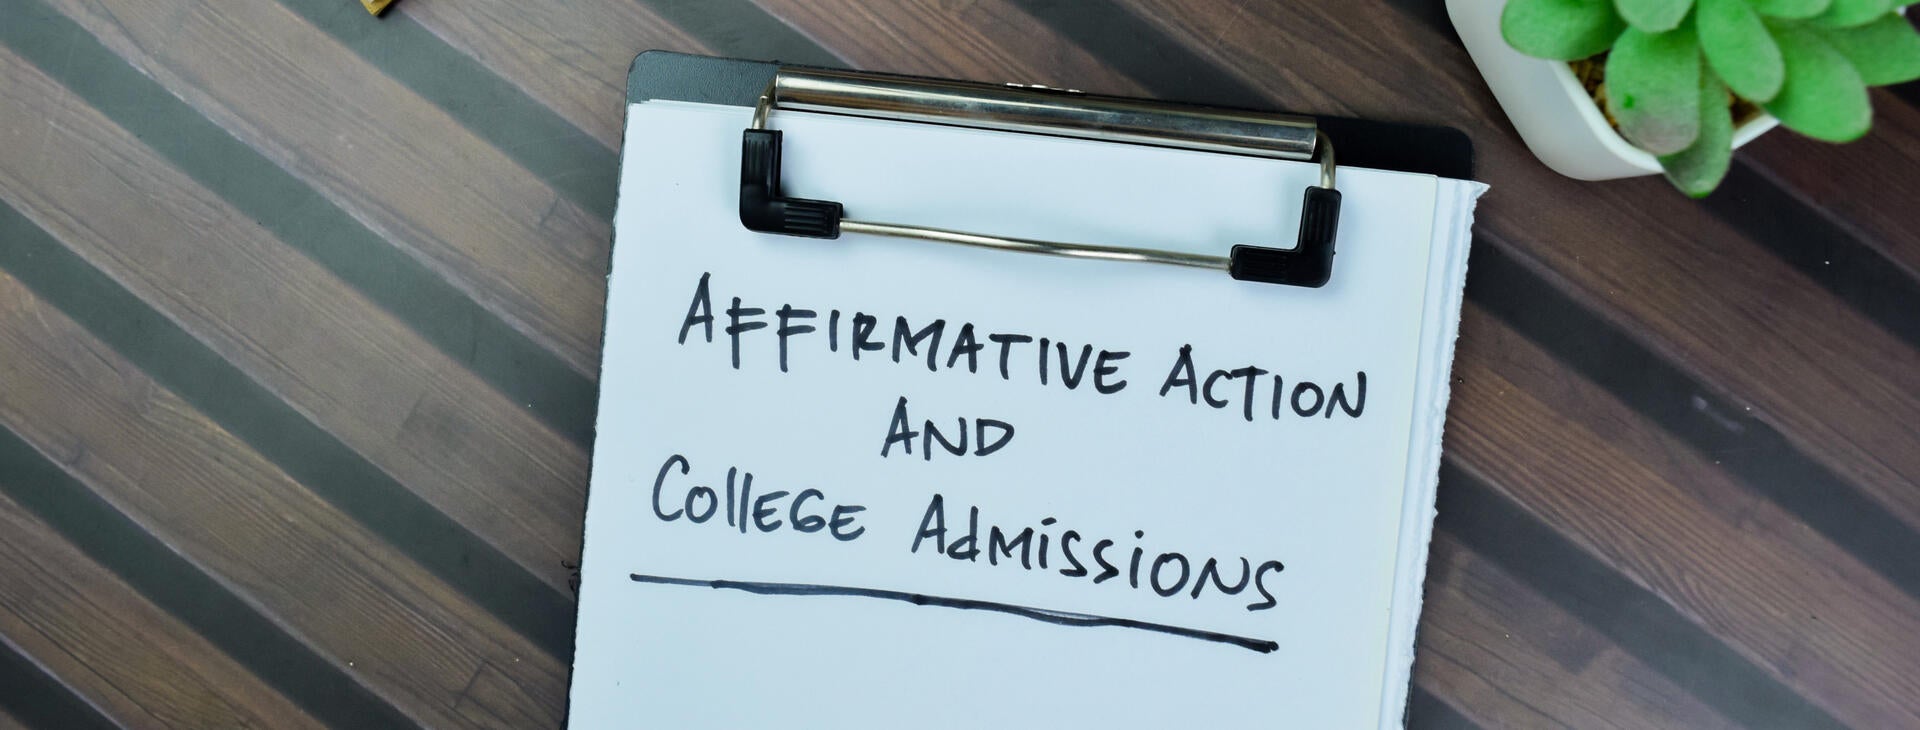 https://anchor.fm/policychats/episodes/Affirmative-Action--College-Admissions-Does-it-Matter-e1tm6vqodcas